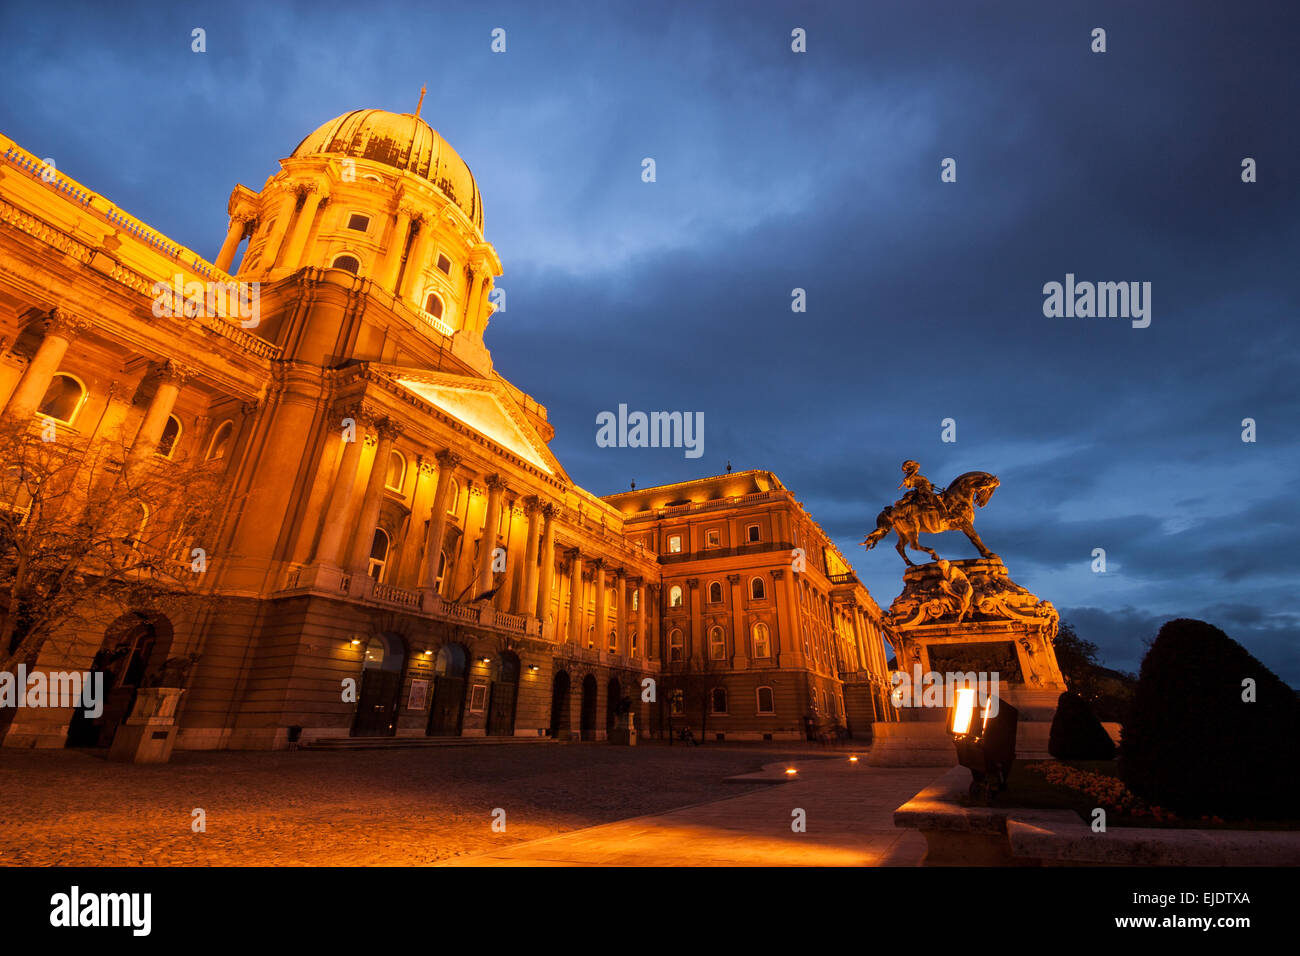 The historic Royal Palace - Buda Castle - History Museum in Budapest - Hungary Stock Photo